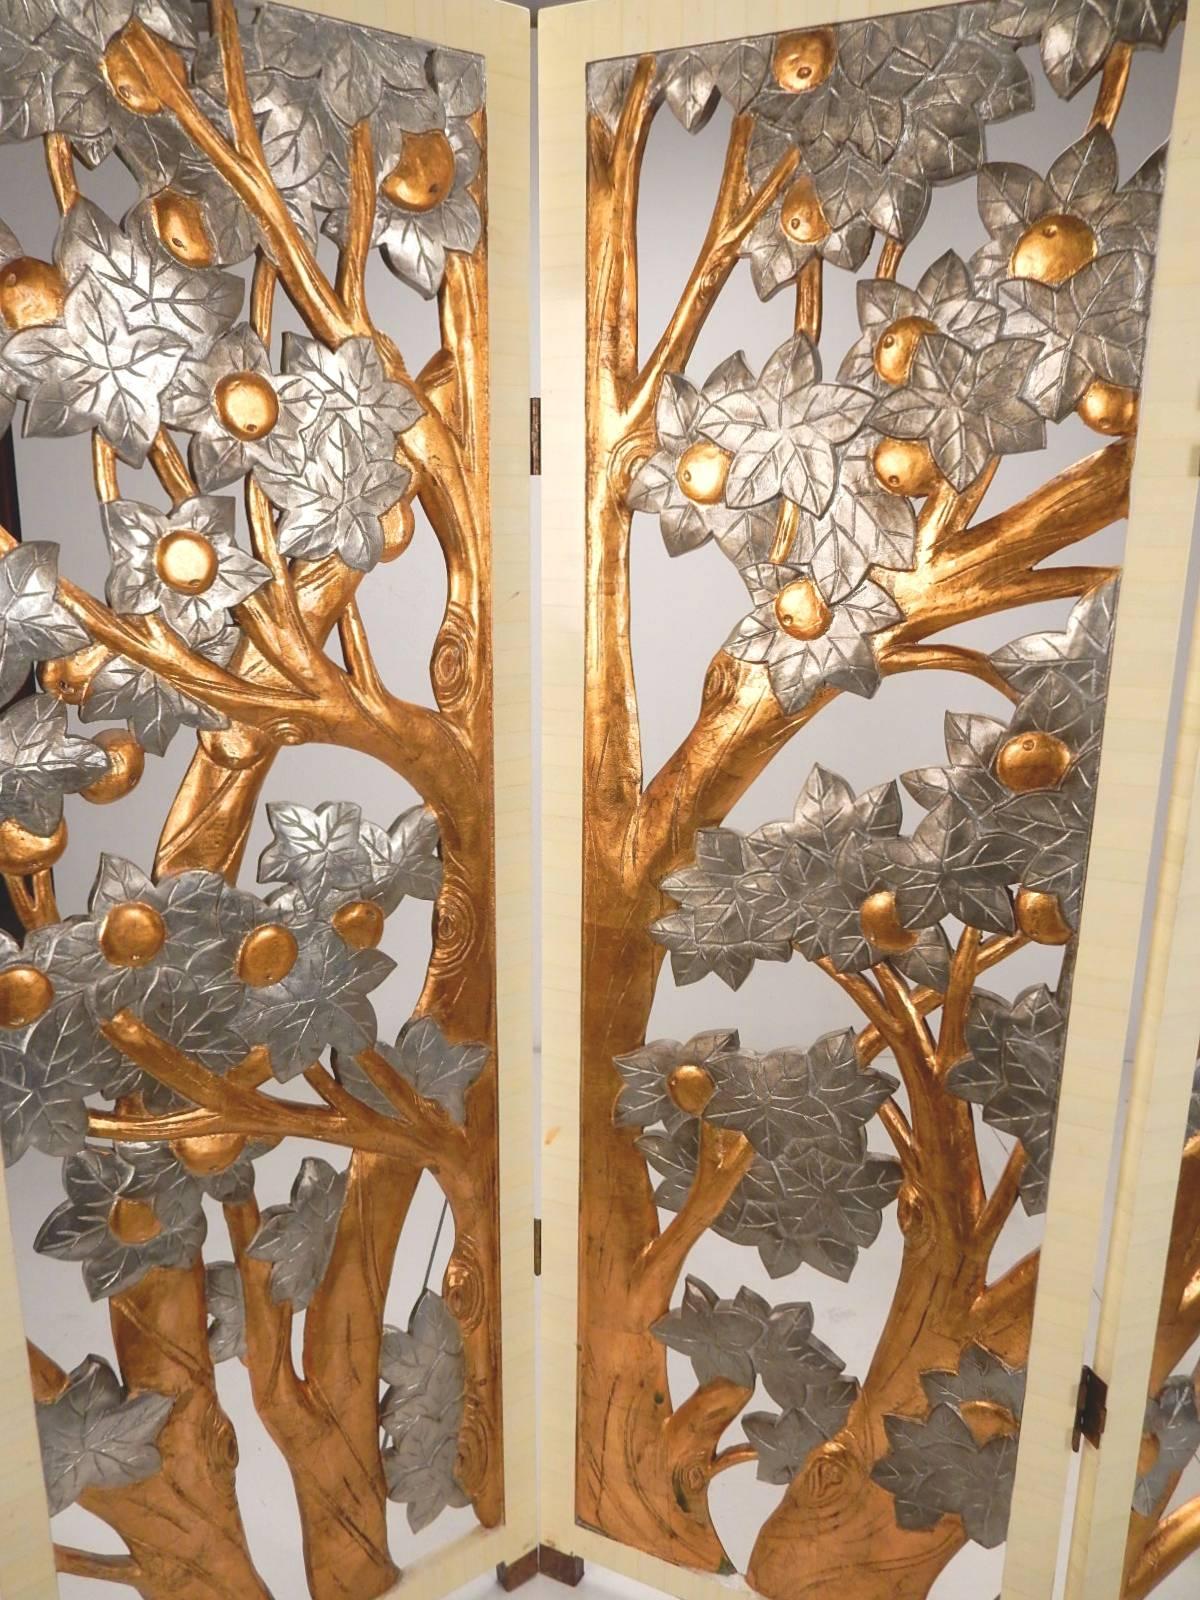 Art Nouveau style gold and silver leaf, fruit tree relief room divider/screen,
circa 1970s-1980s.
A gorgeous piece of functional art with hand applied gold and silver leaf that delightfully glows in light. Cut out design allowing 